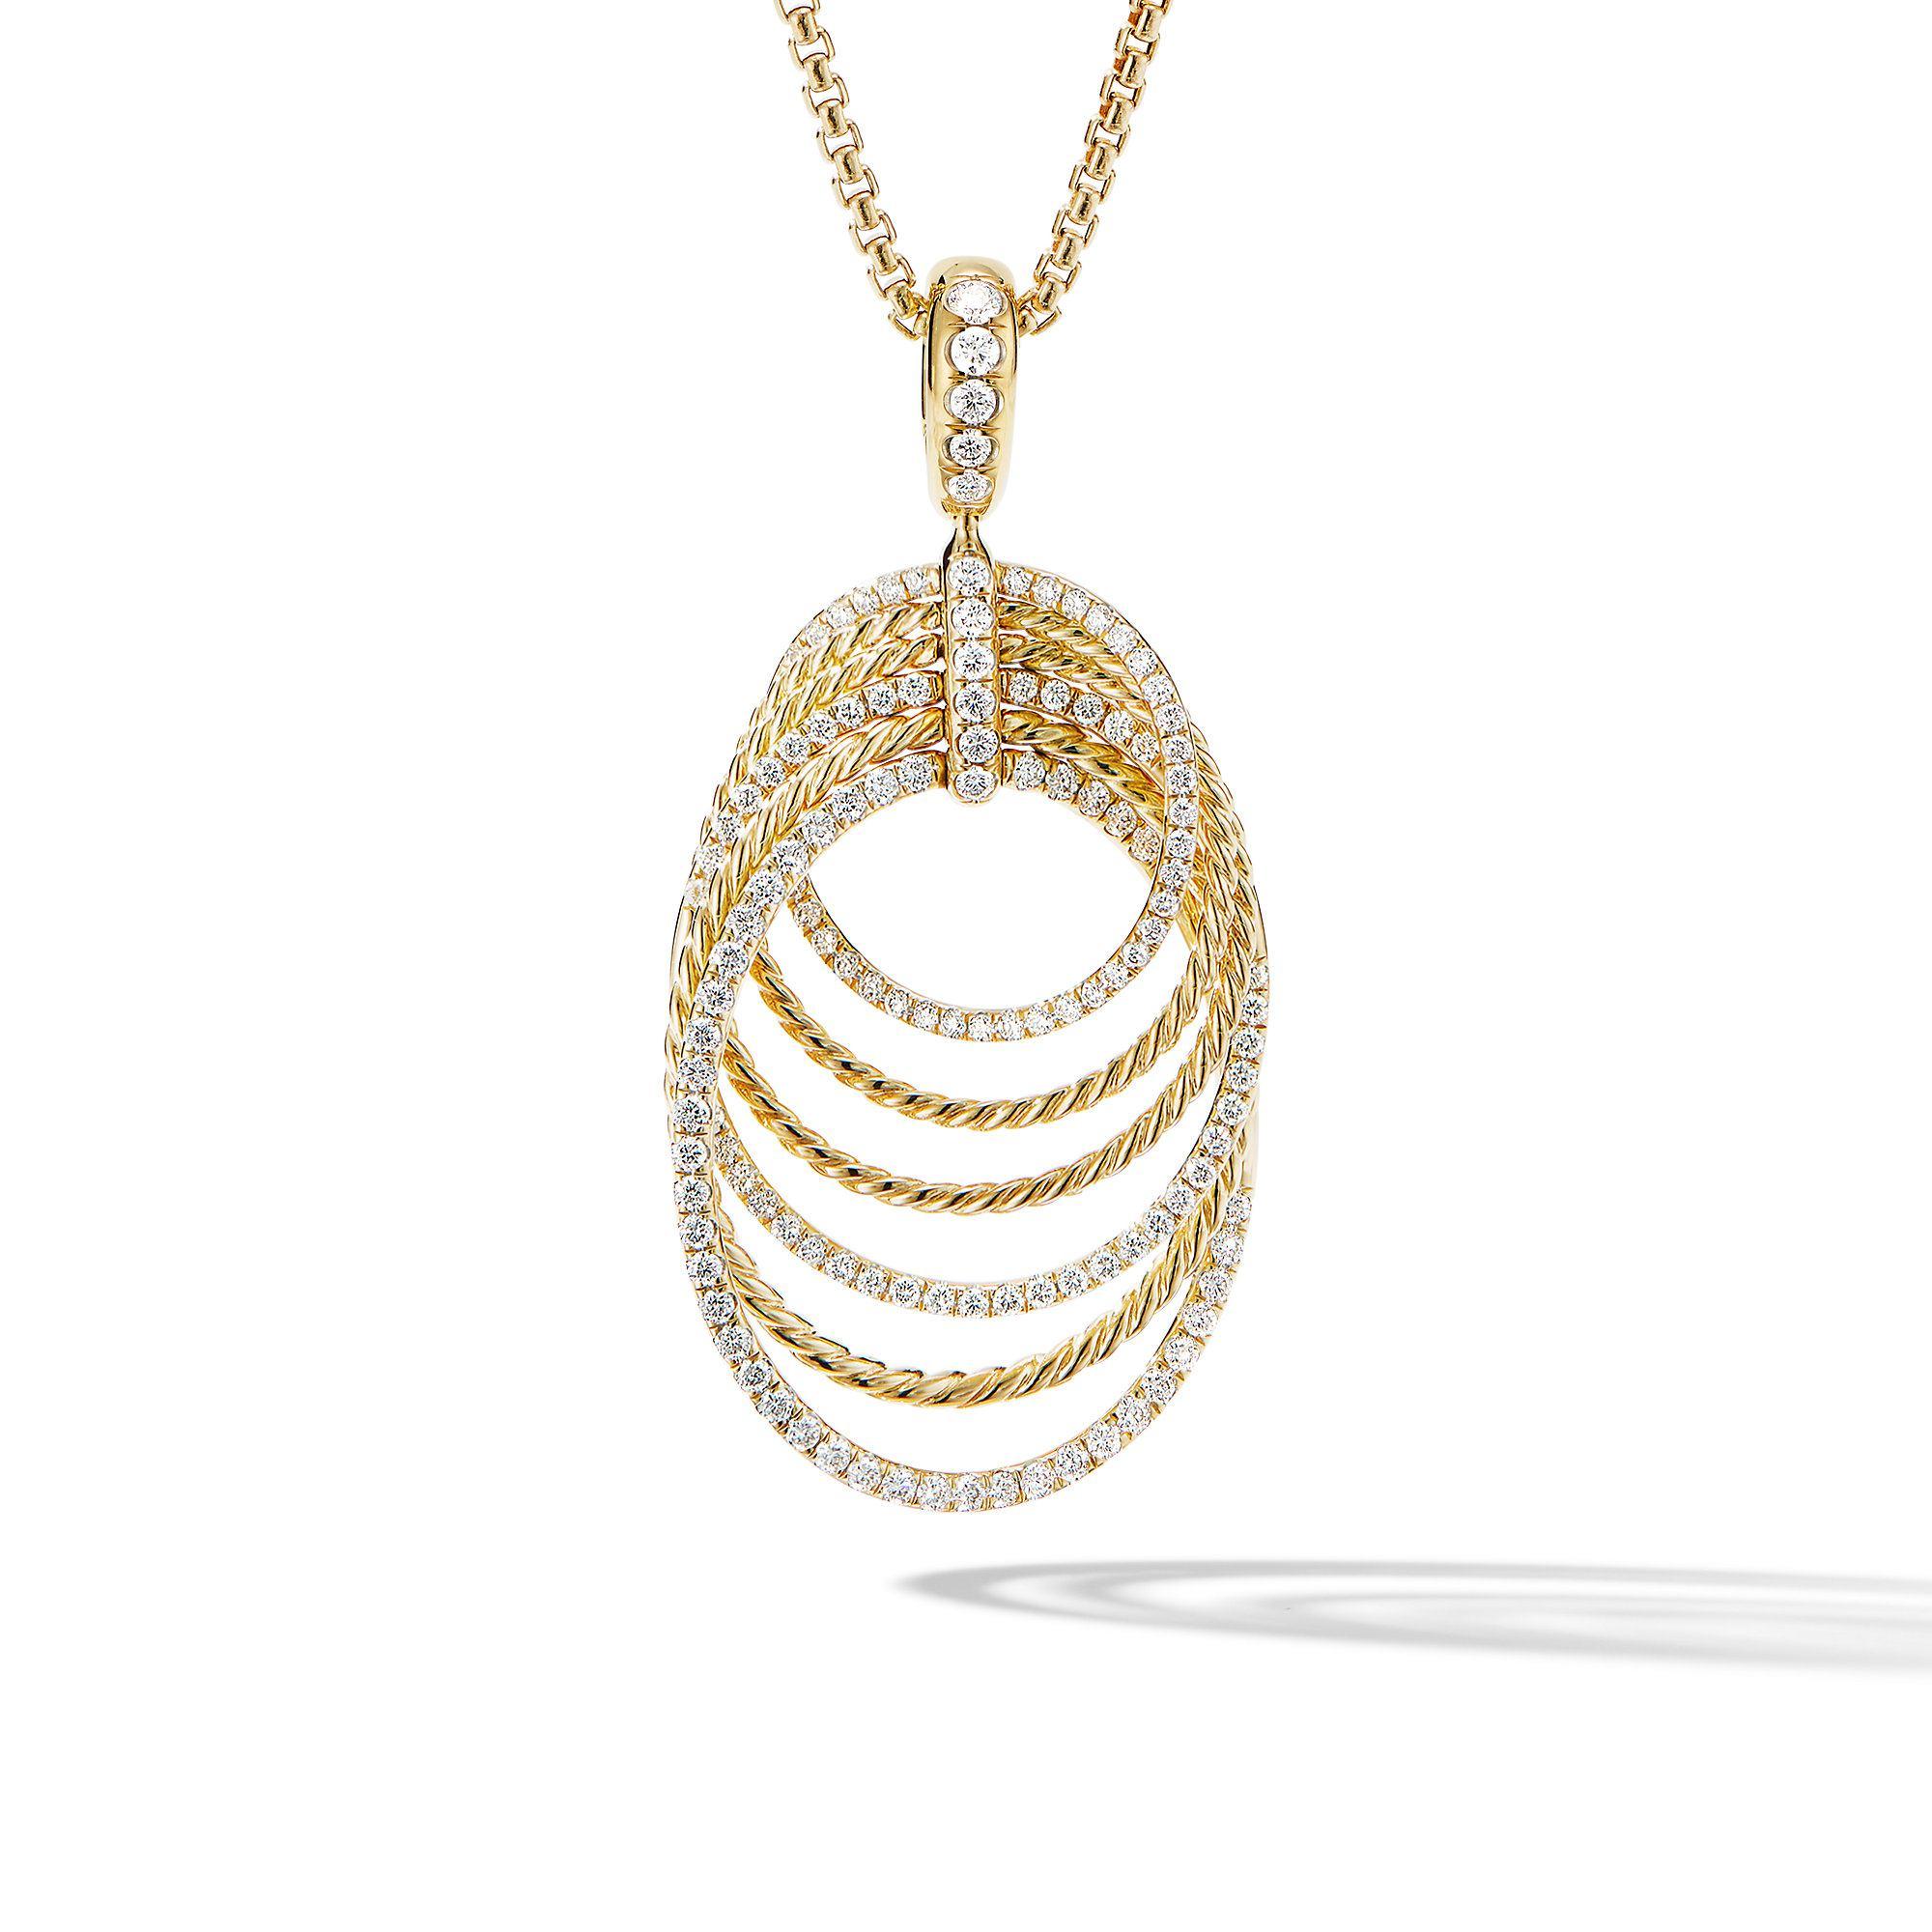 David Yurman DY Origami Pendant Necklace in 18k Yellow Gold with Diamonds